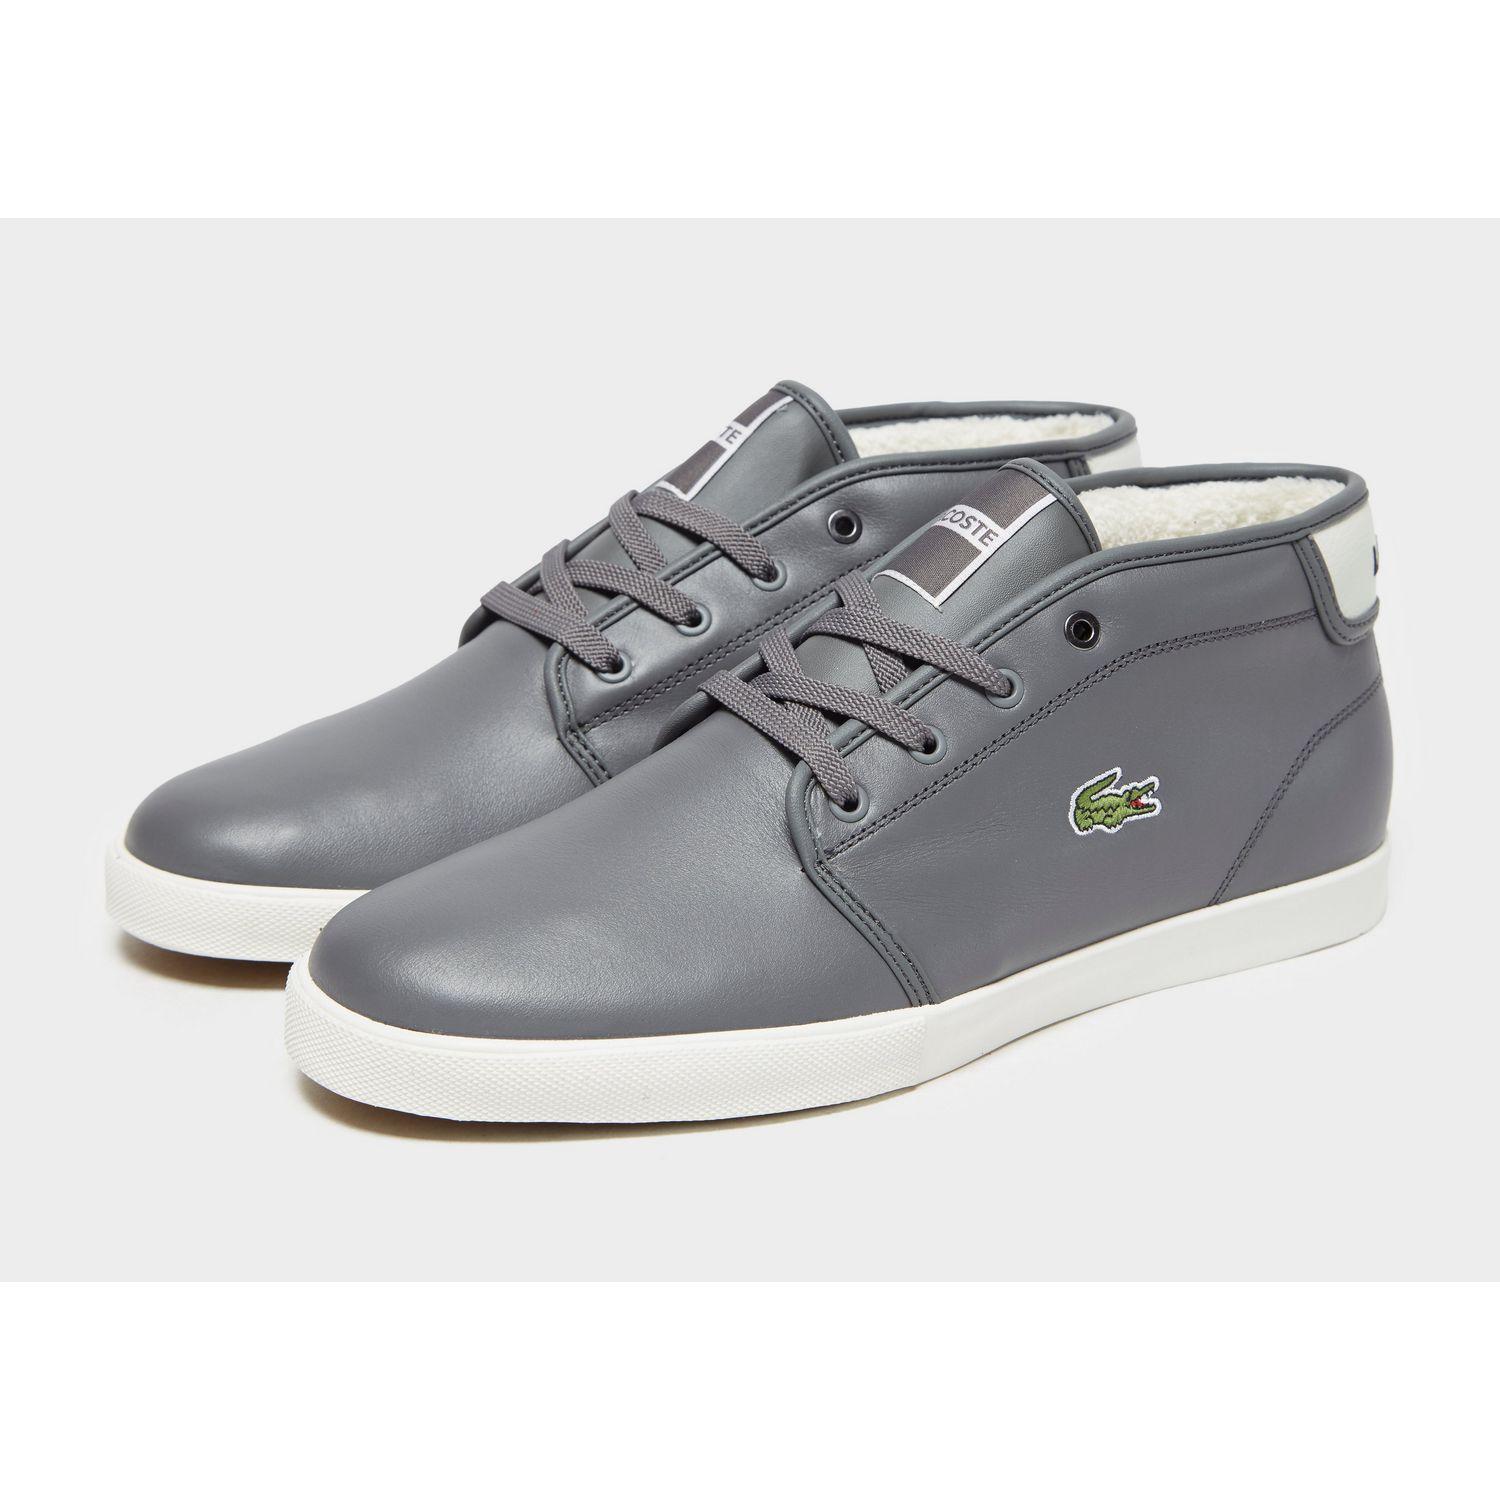 Lacoste Leather Ampthill in Grey/White 